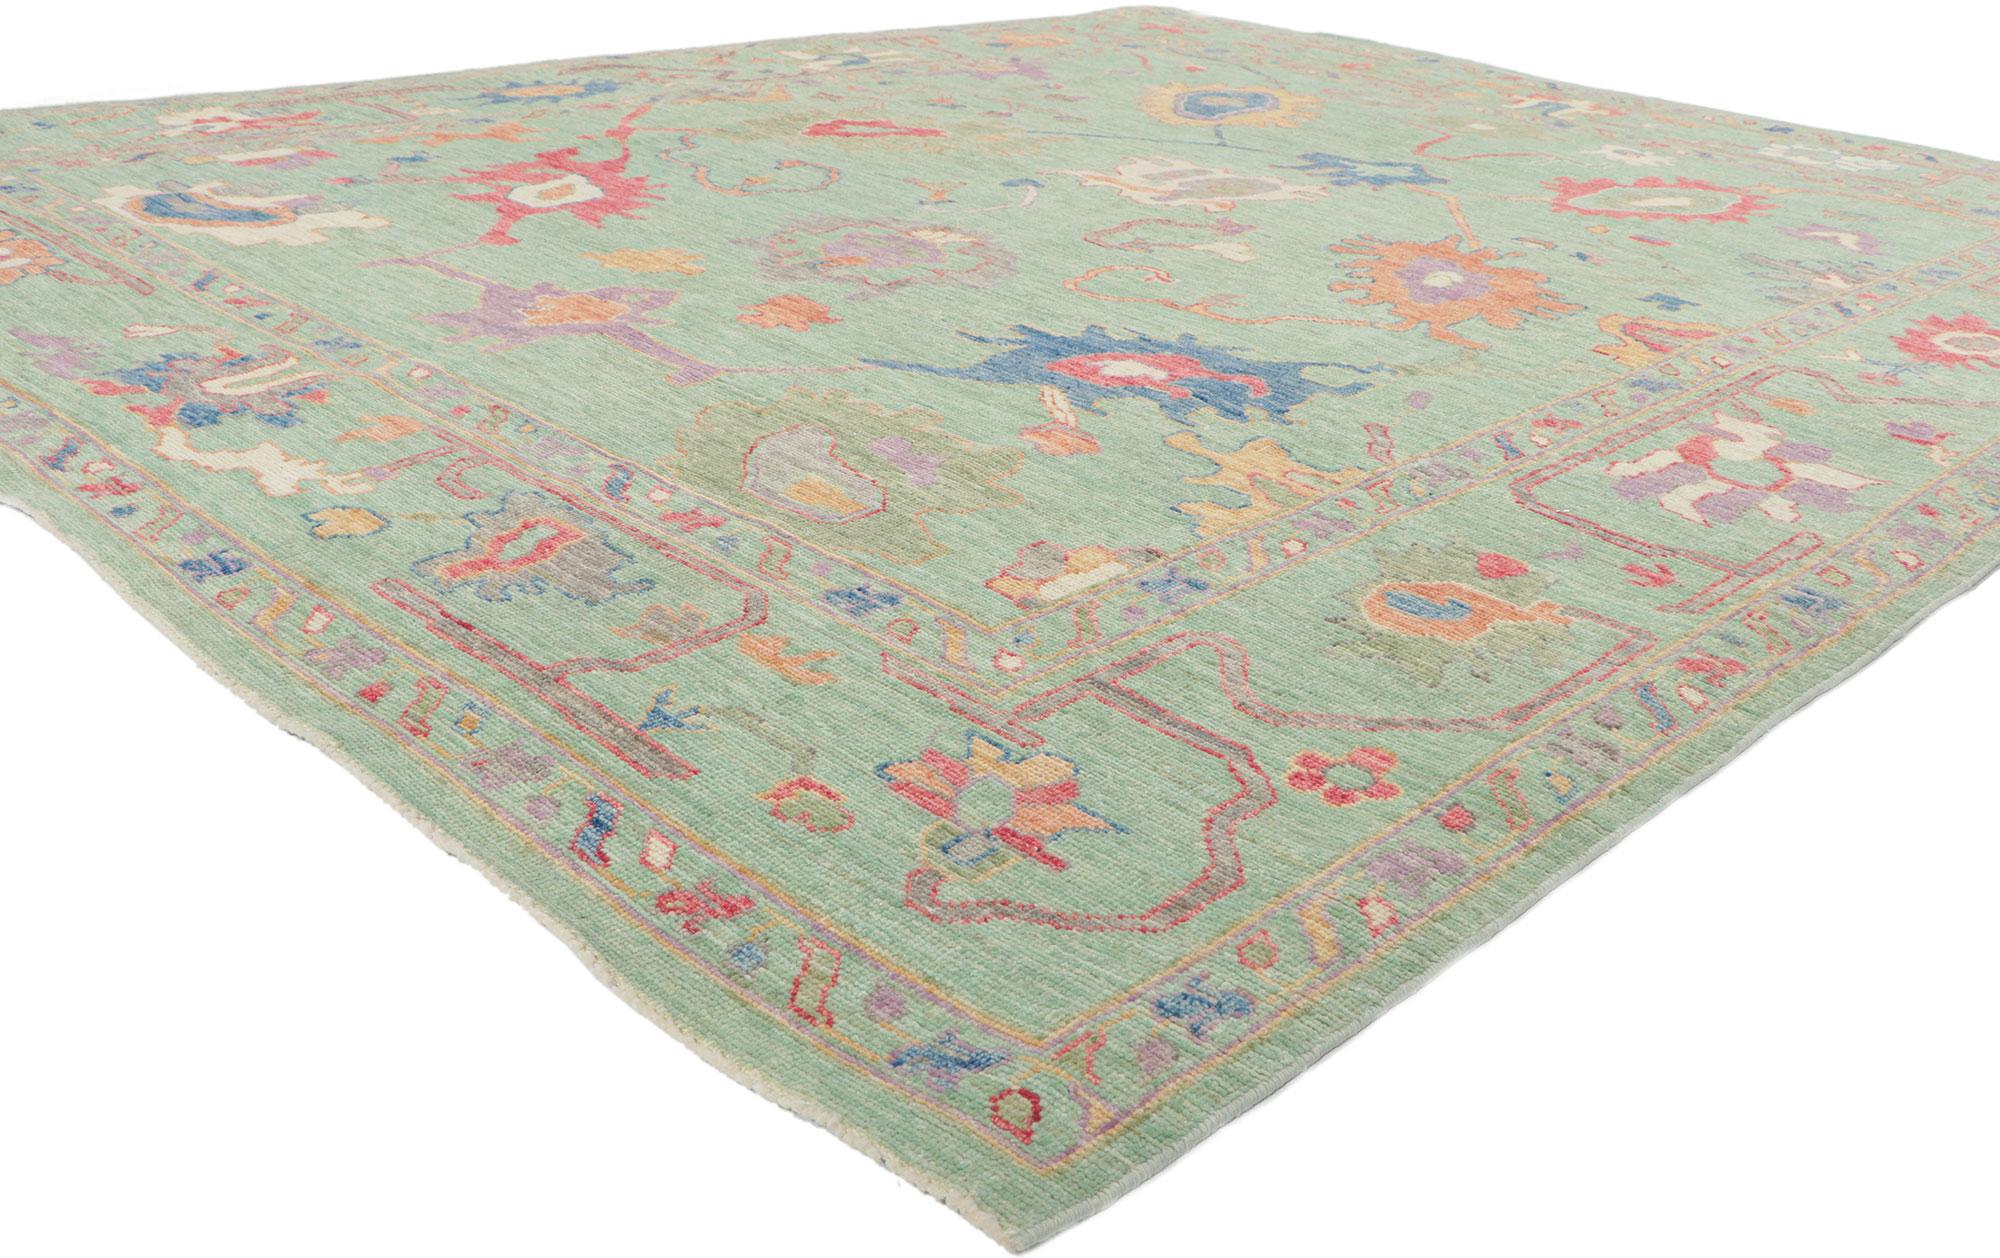 80901 New Colorful Green Oushak Rug with Modern Style, 
Polished and playful, this hand-knotted wool colorful Oushak rug beautifully embodies a modern style. The composition features an all-over botanical pattern composed of amorphous organic motifs